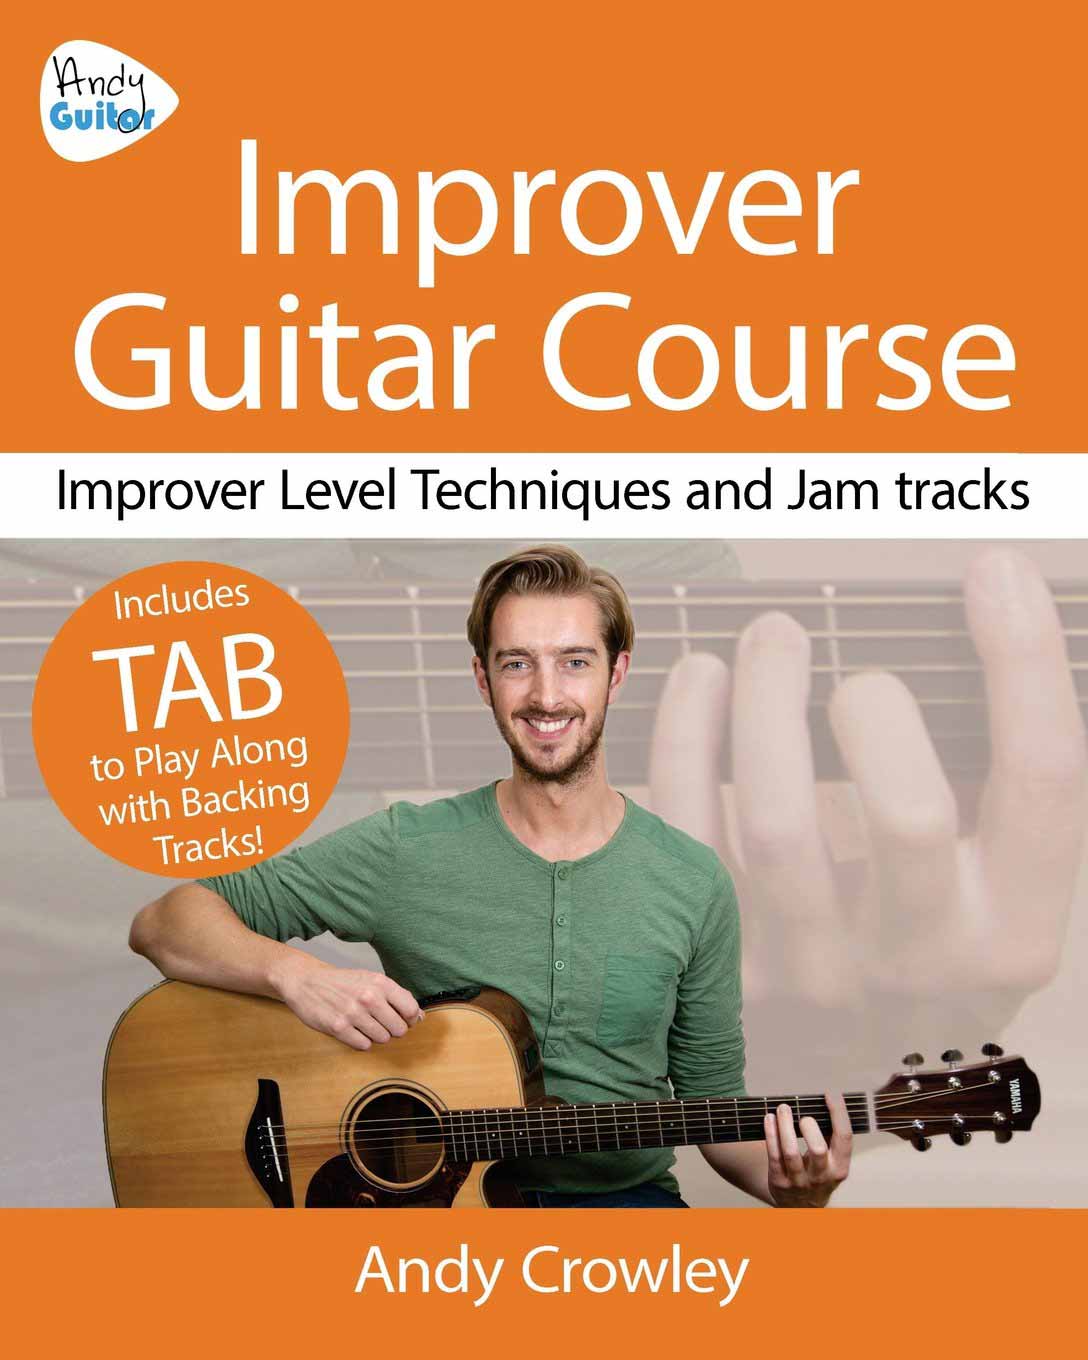 Andy's Improver Course Book